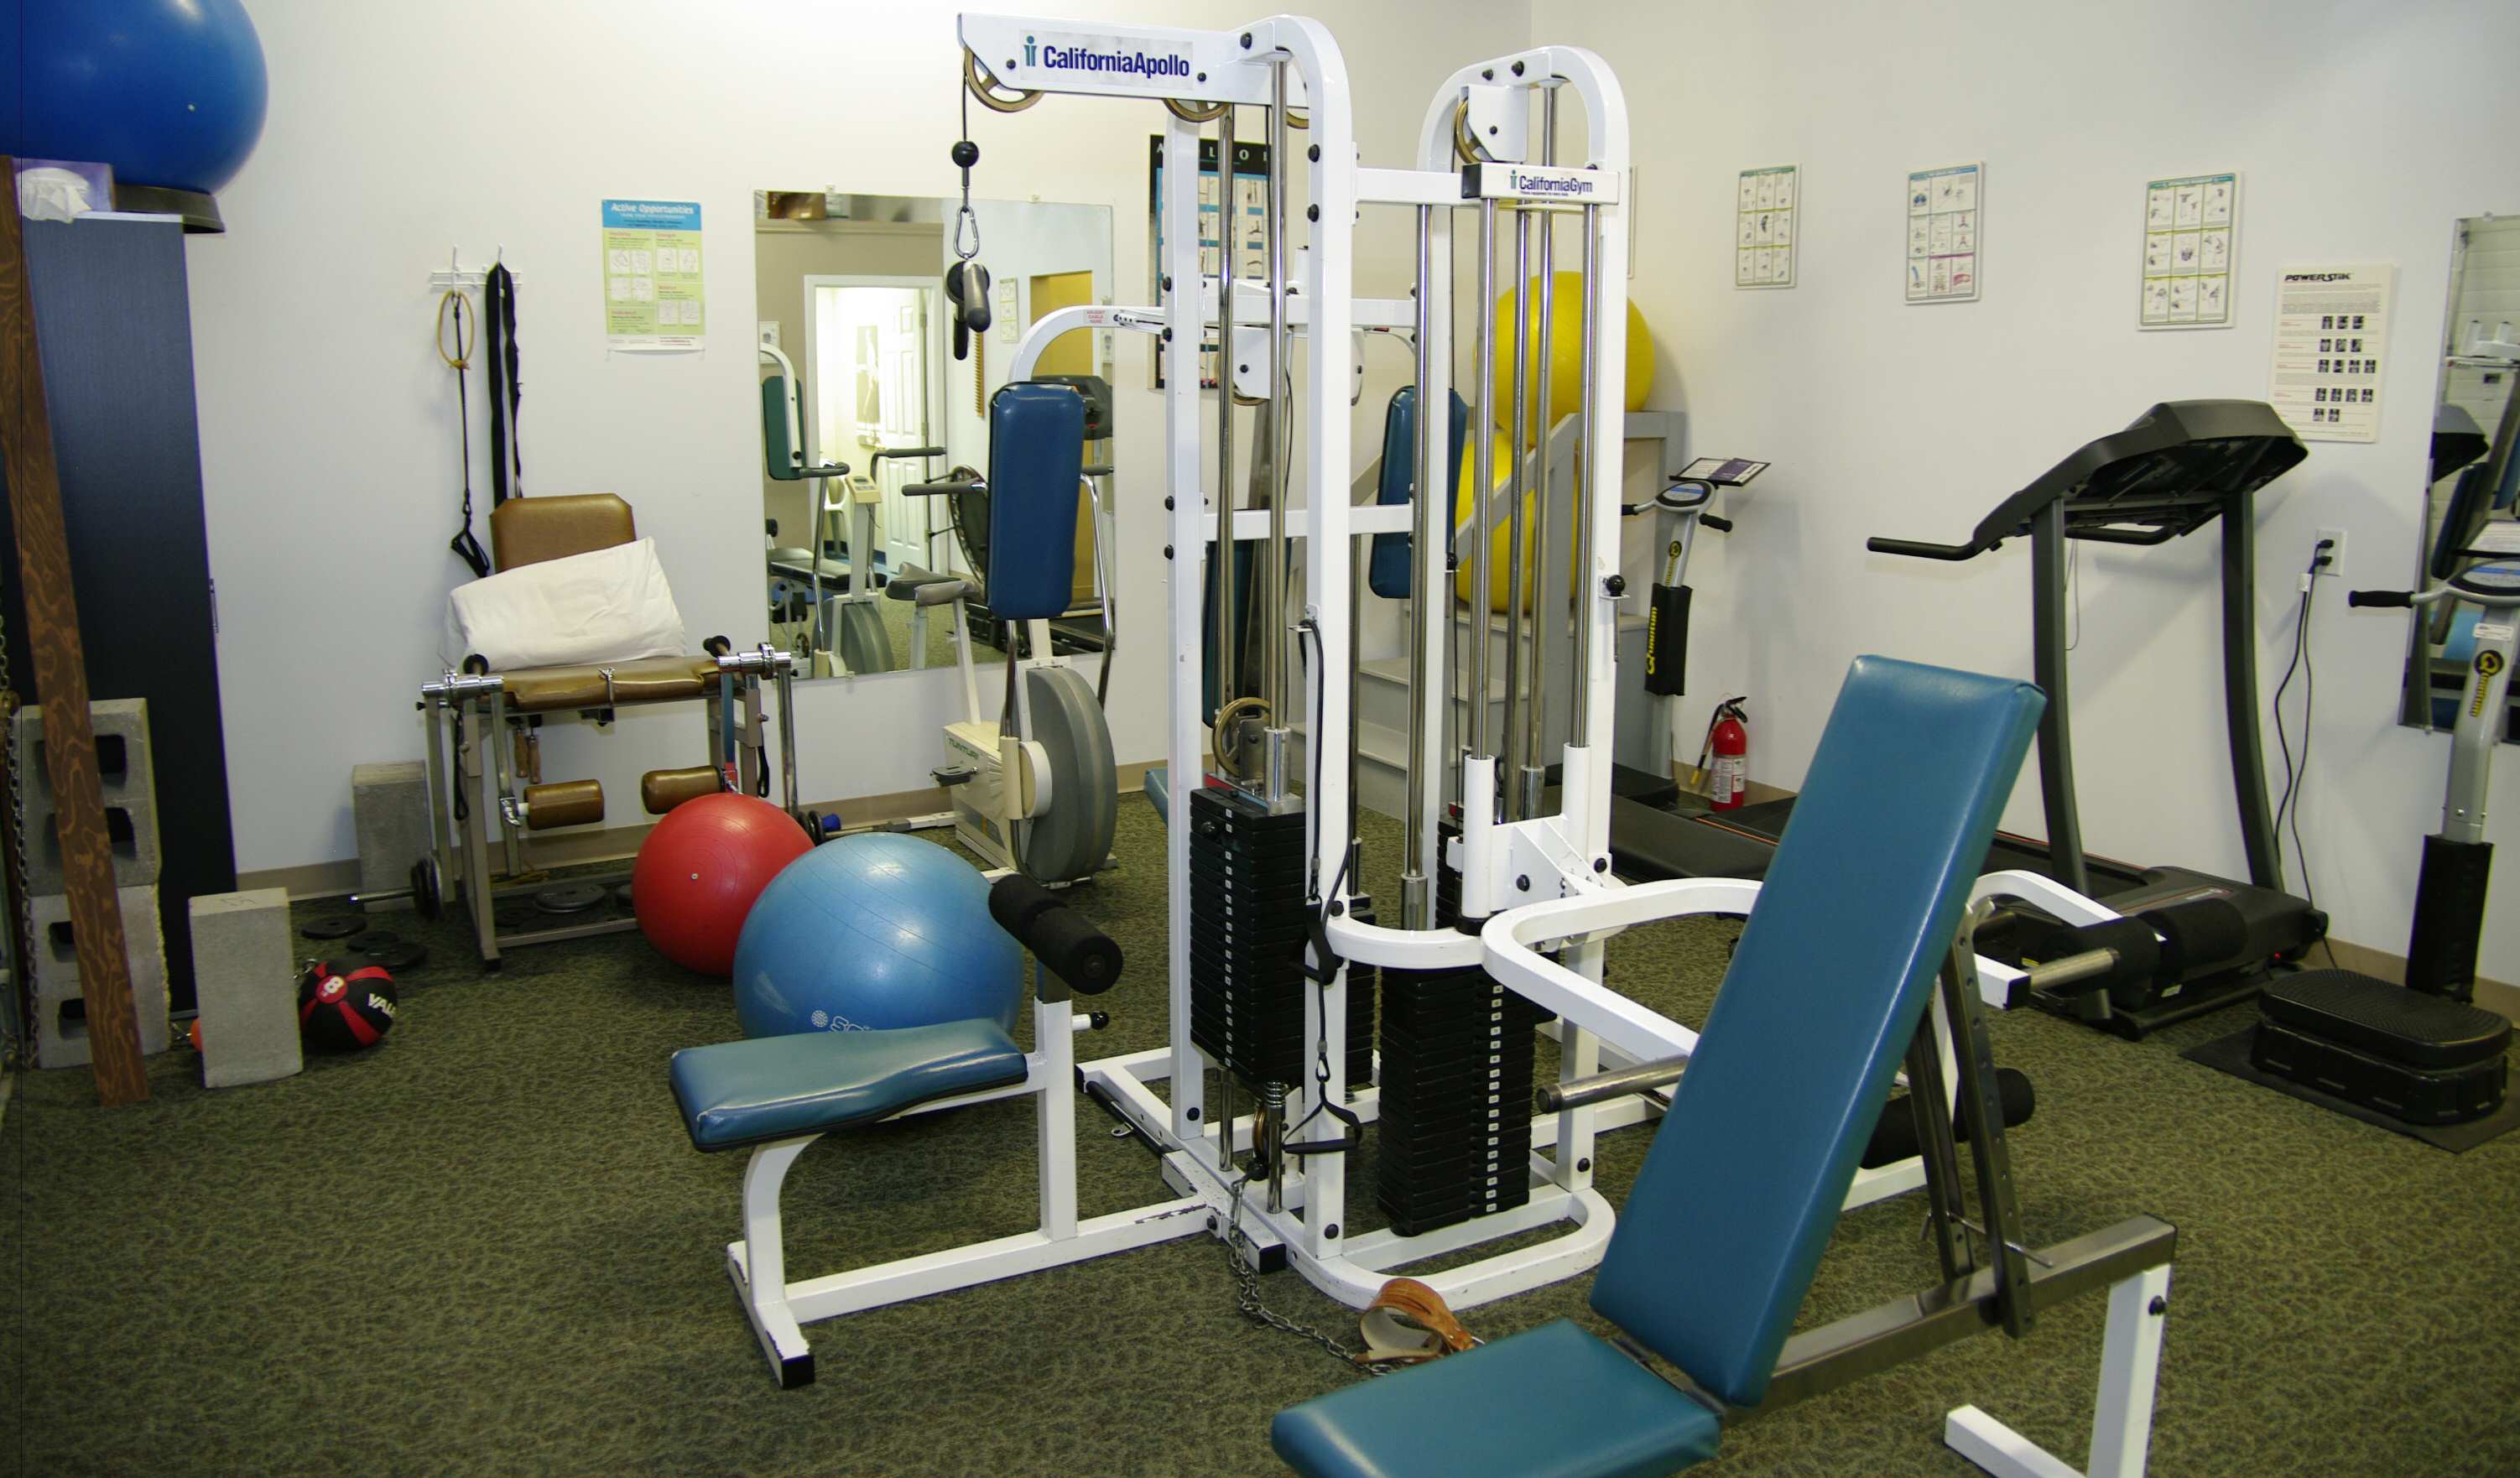 The St. James Rhab clinic provides a gym area and equipment for use by its clients